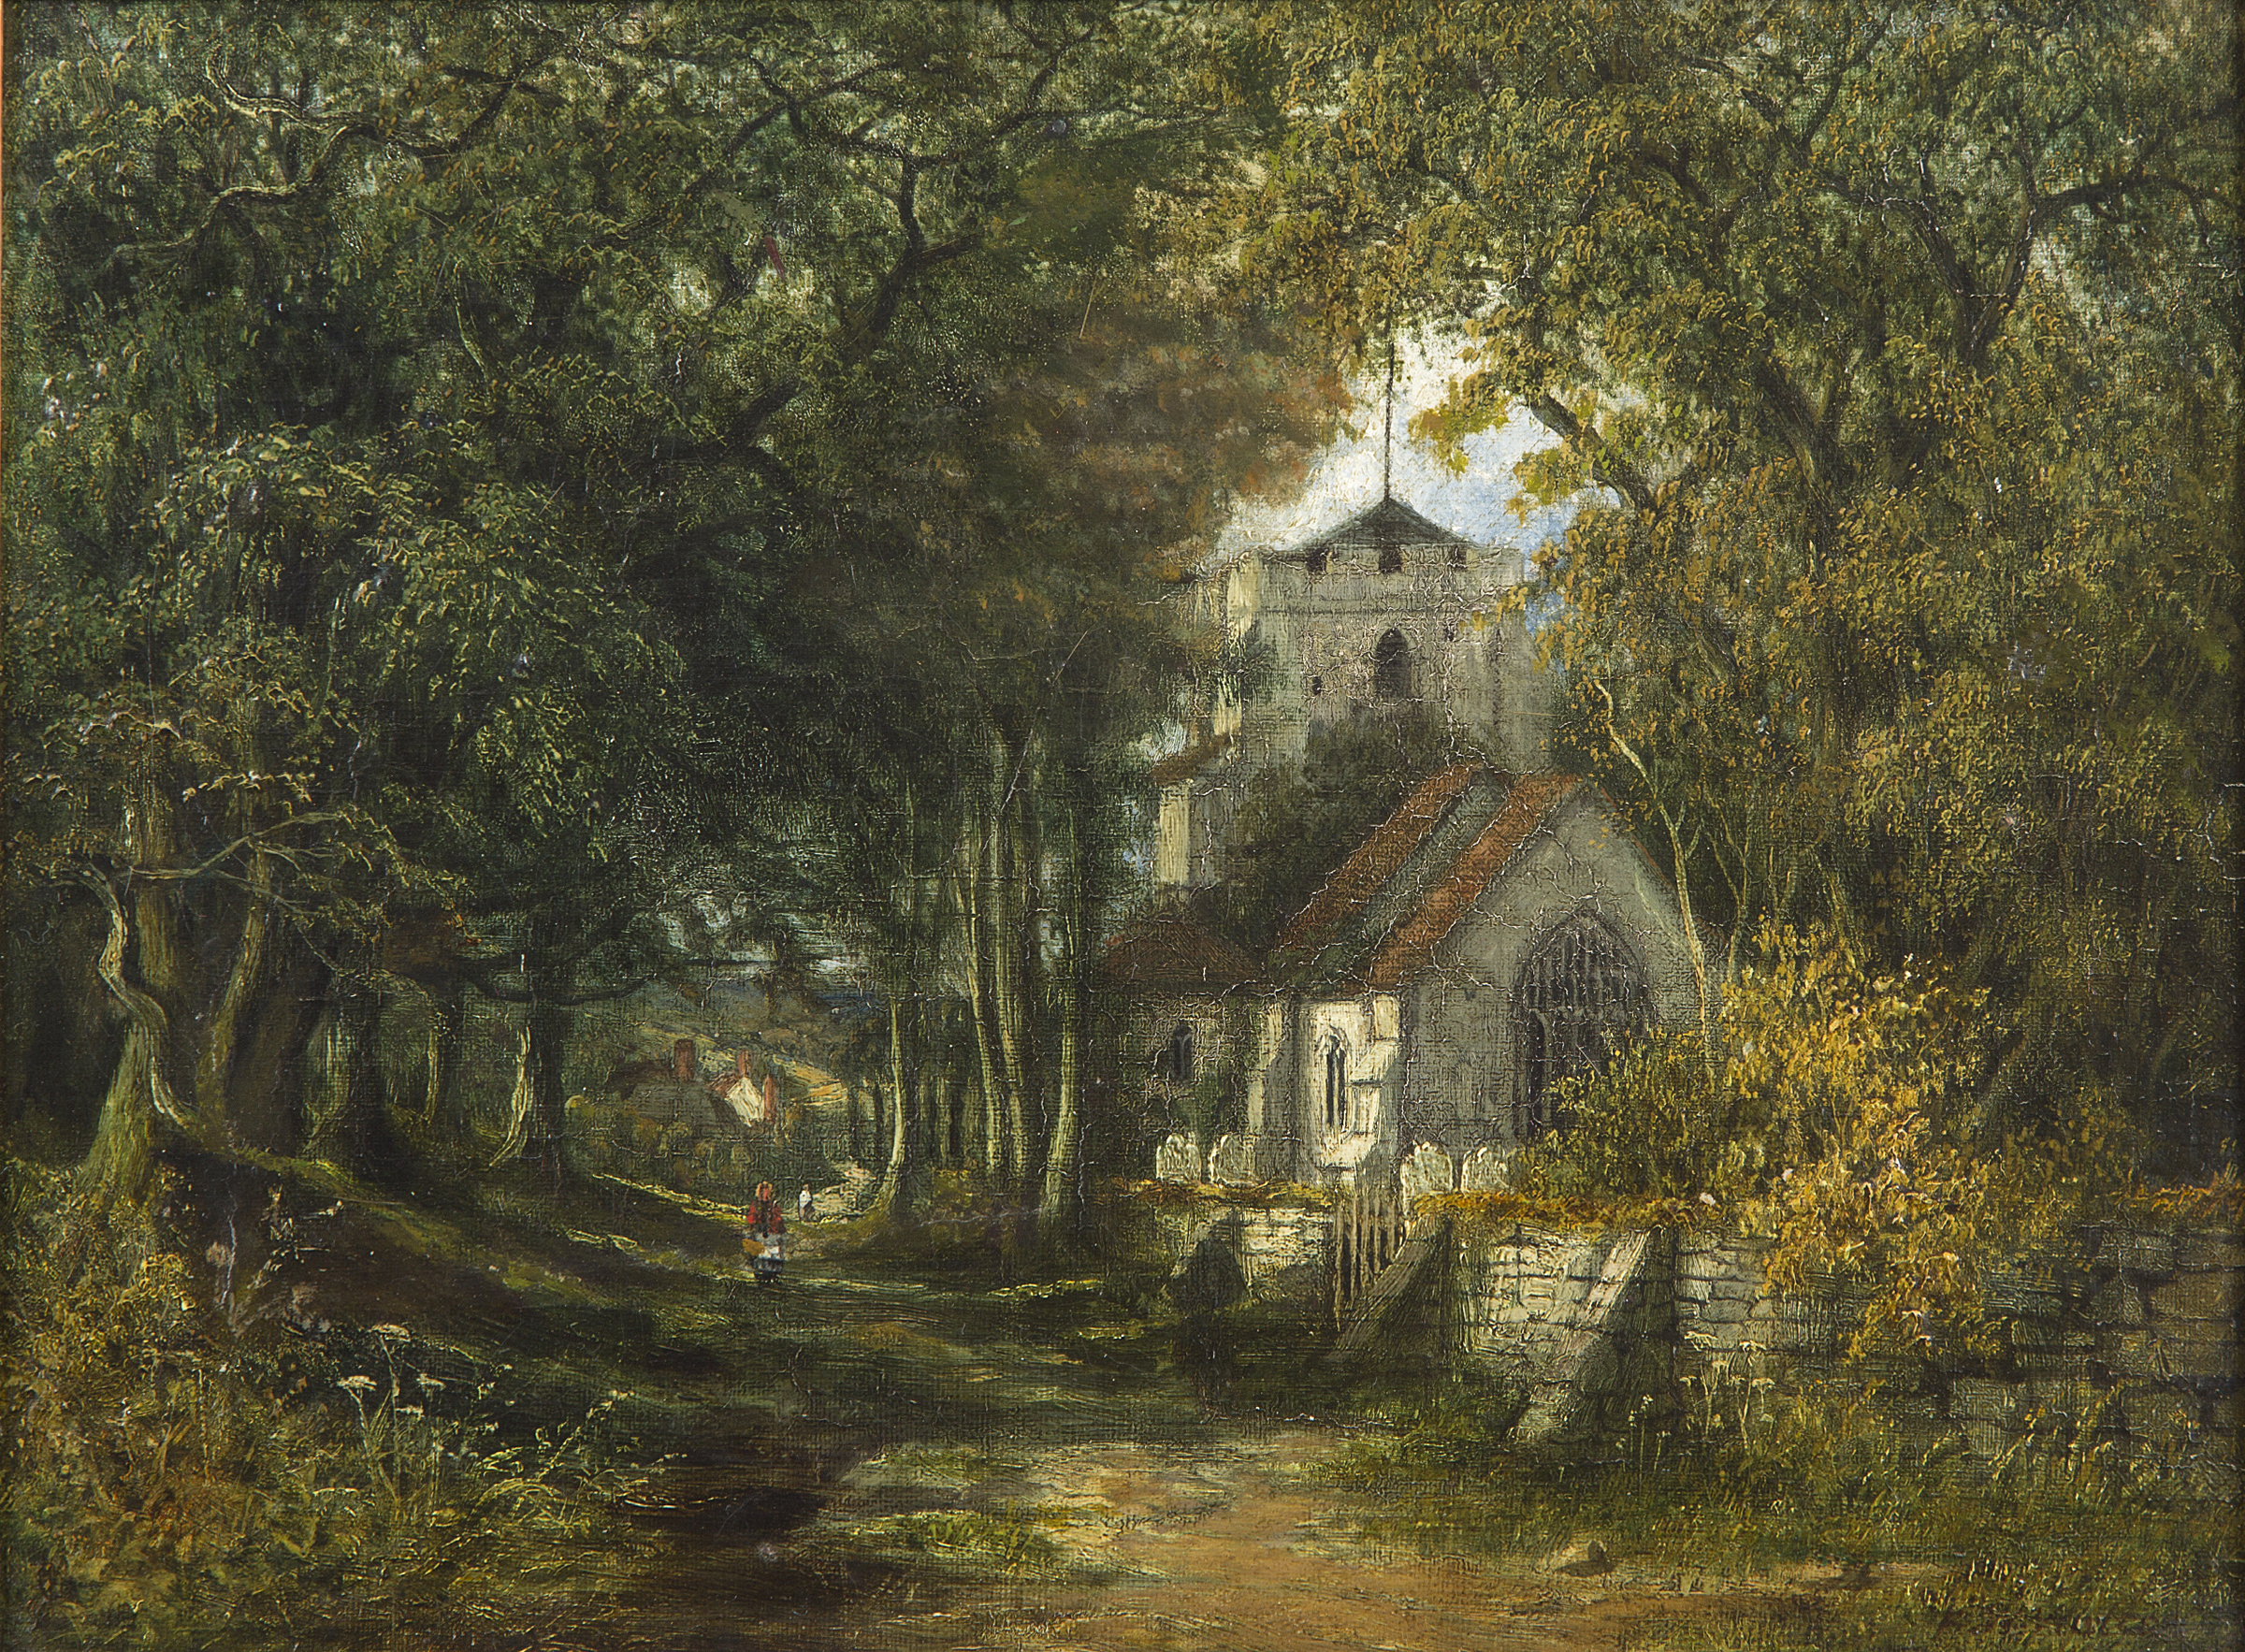 ATTRIBUTED TO FREDRICK WATERS WATTS (1800-1870), 
The Village Church with Figure on a Lane, O.O.C.